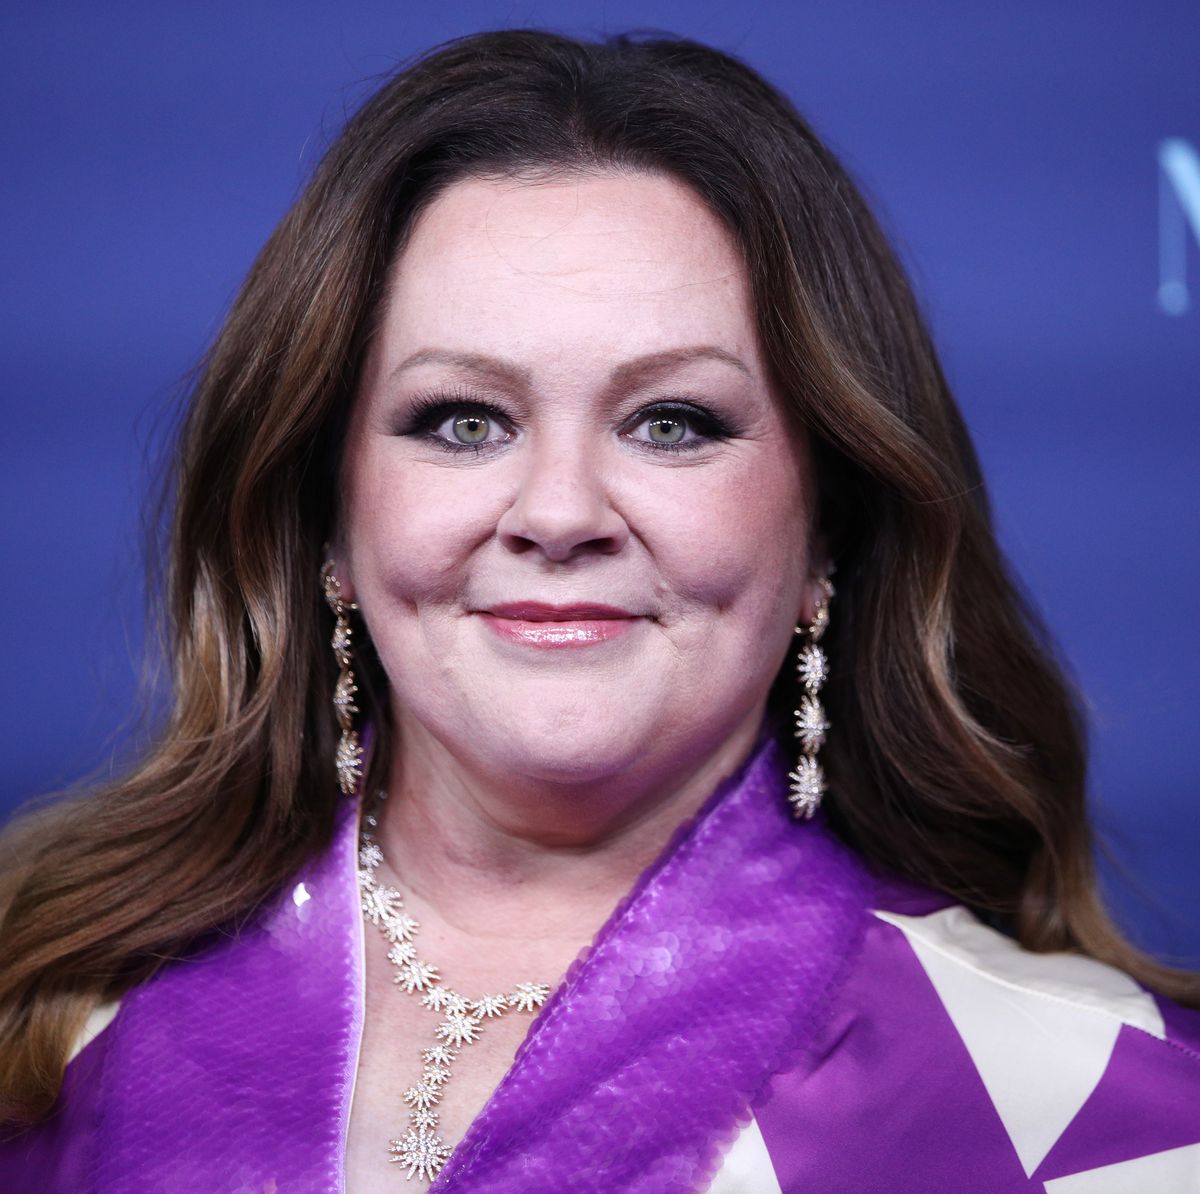 https://hips.hearstapps.com/hmg-prod/images/melissa-mccarthy-attends-the-australian-premiere-of-the-news-photo-1685663939.jpg?crop=0.670xw:1.00xh;0.138xw,0&resize=1200:*